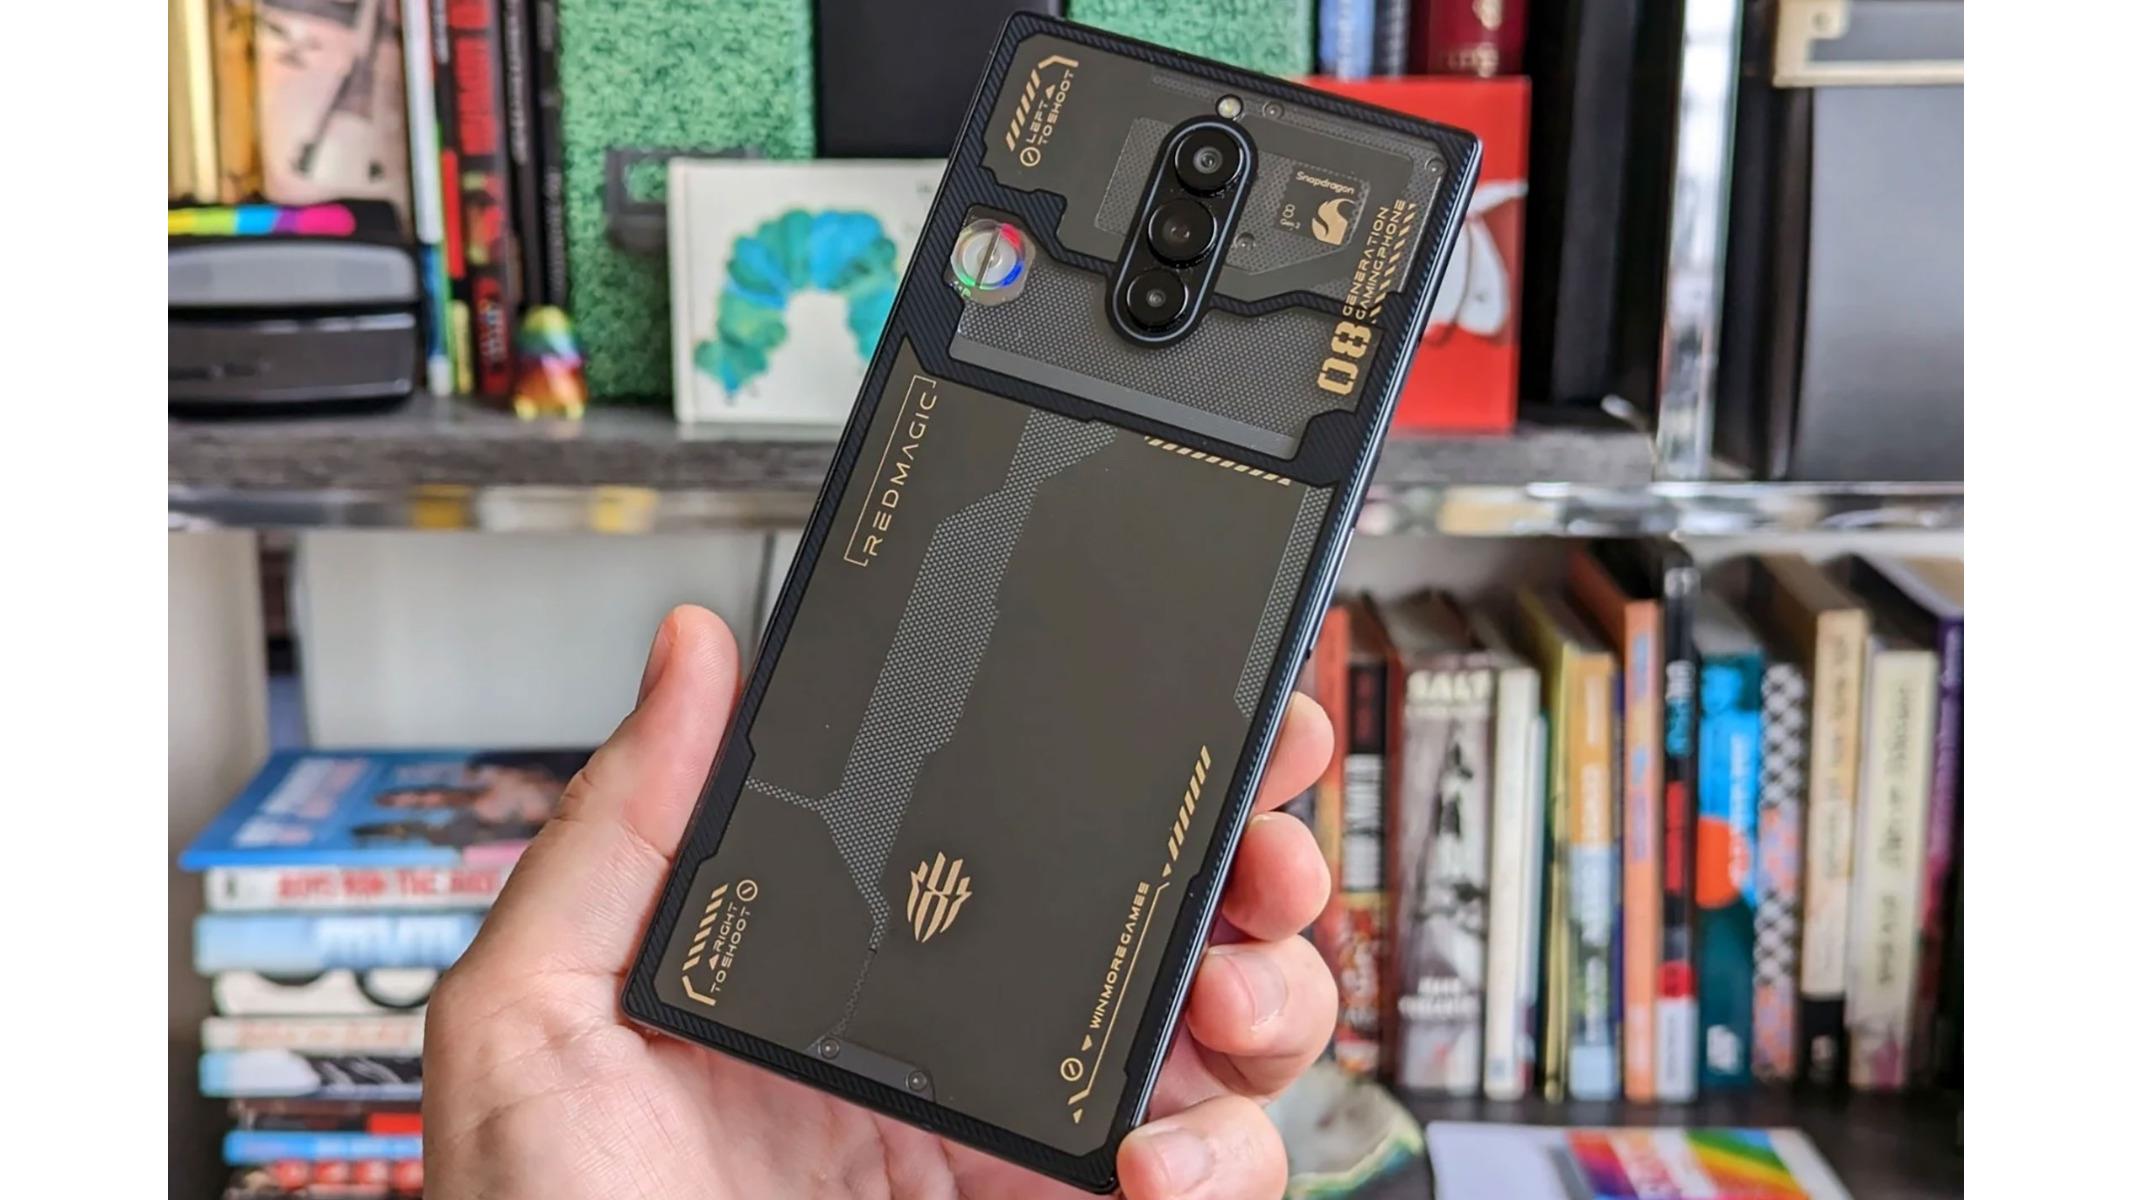 RedMagic 8 Pro Review: A Hot Android Gaming Value Phone | HotHardware